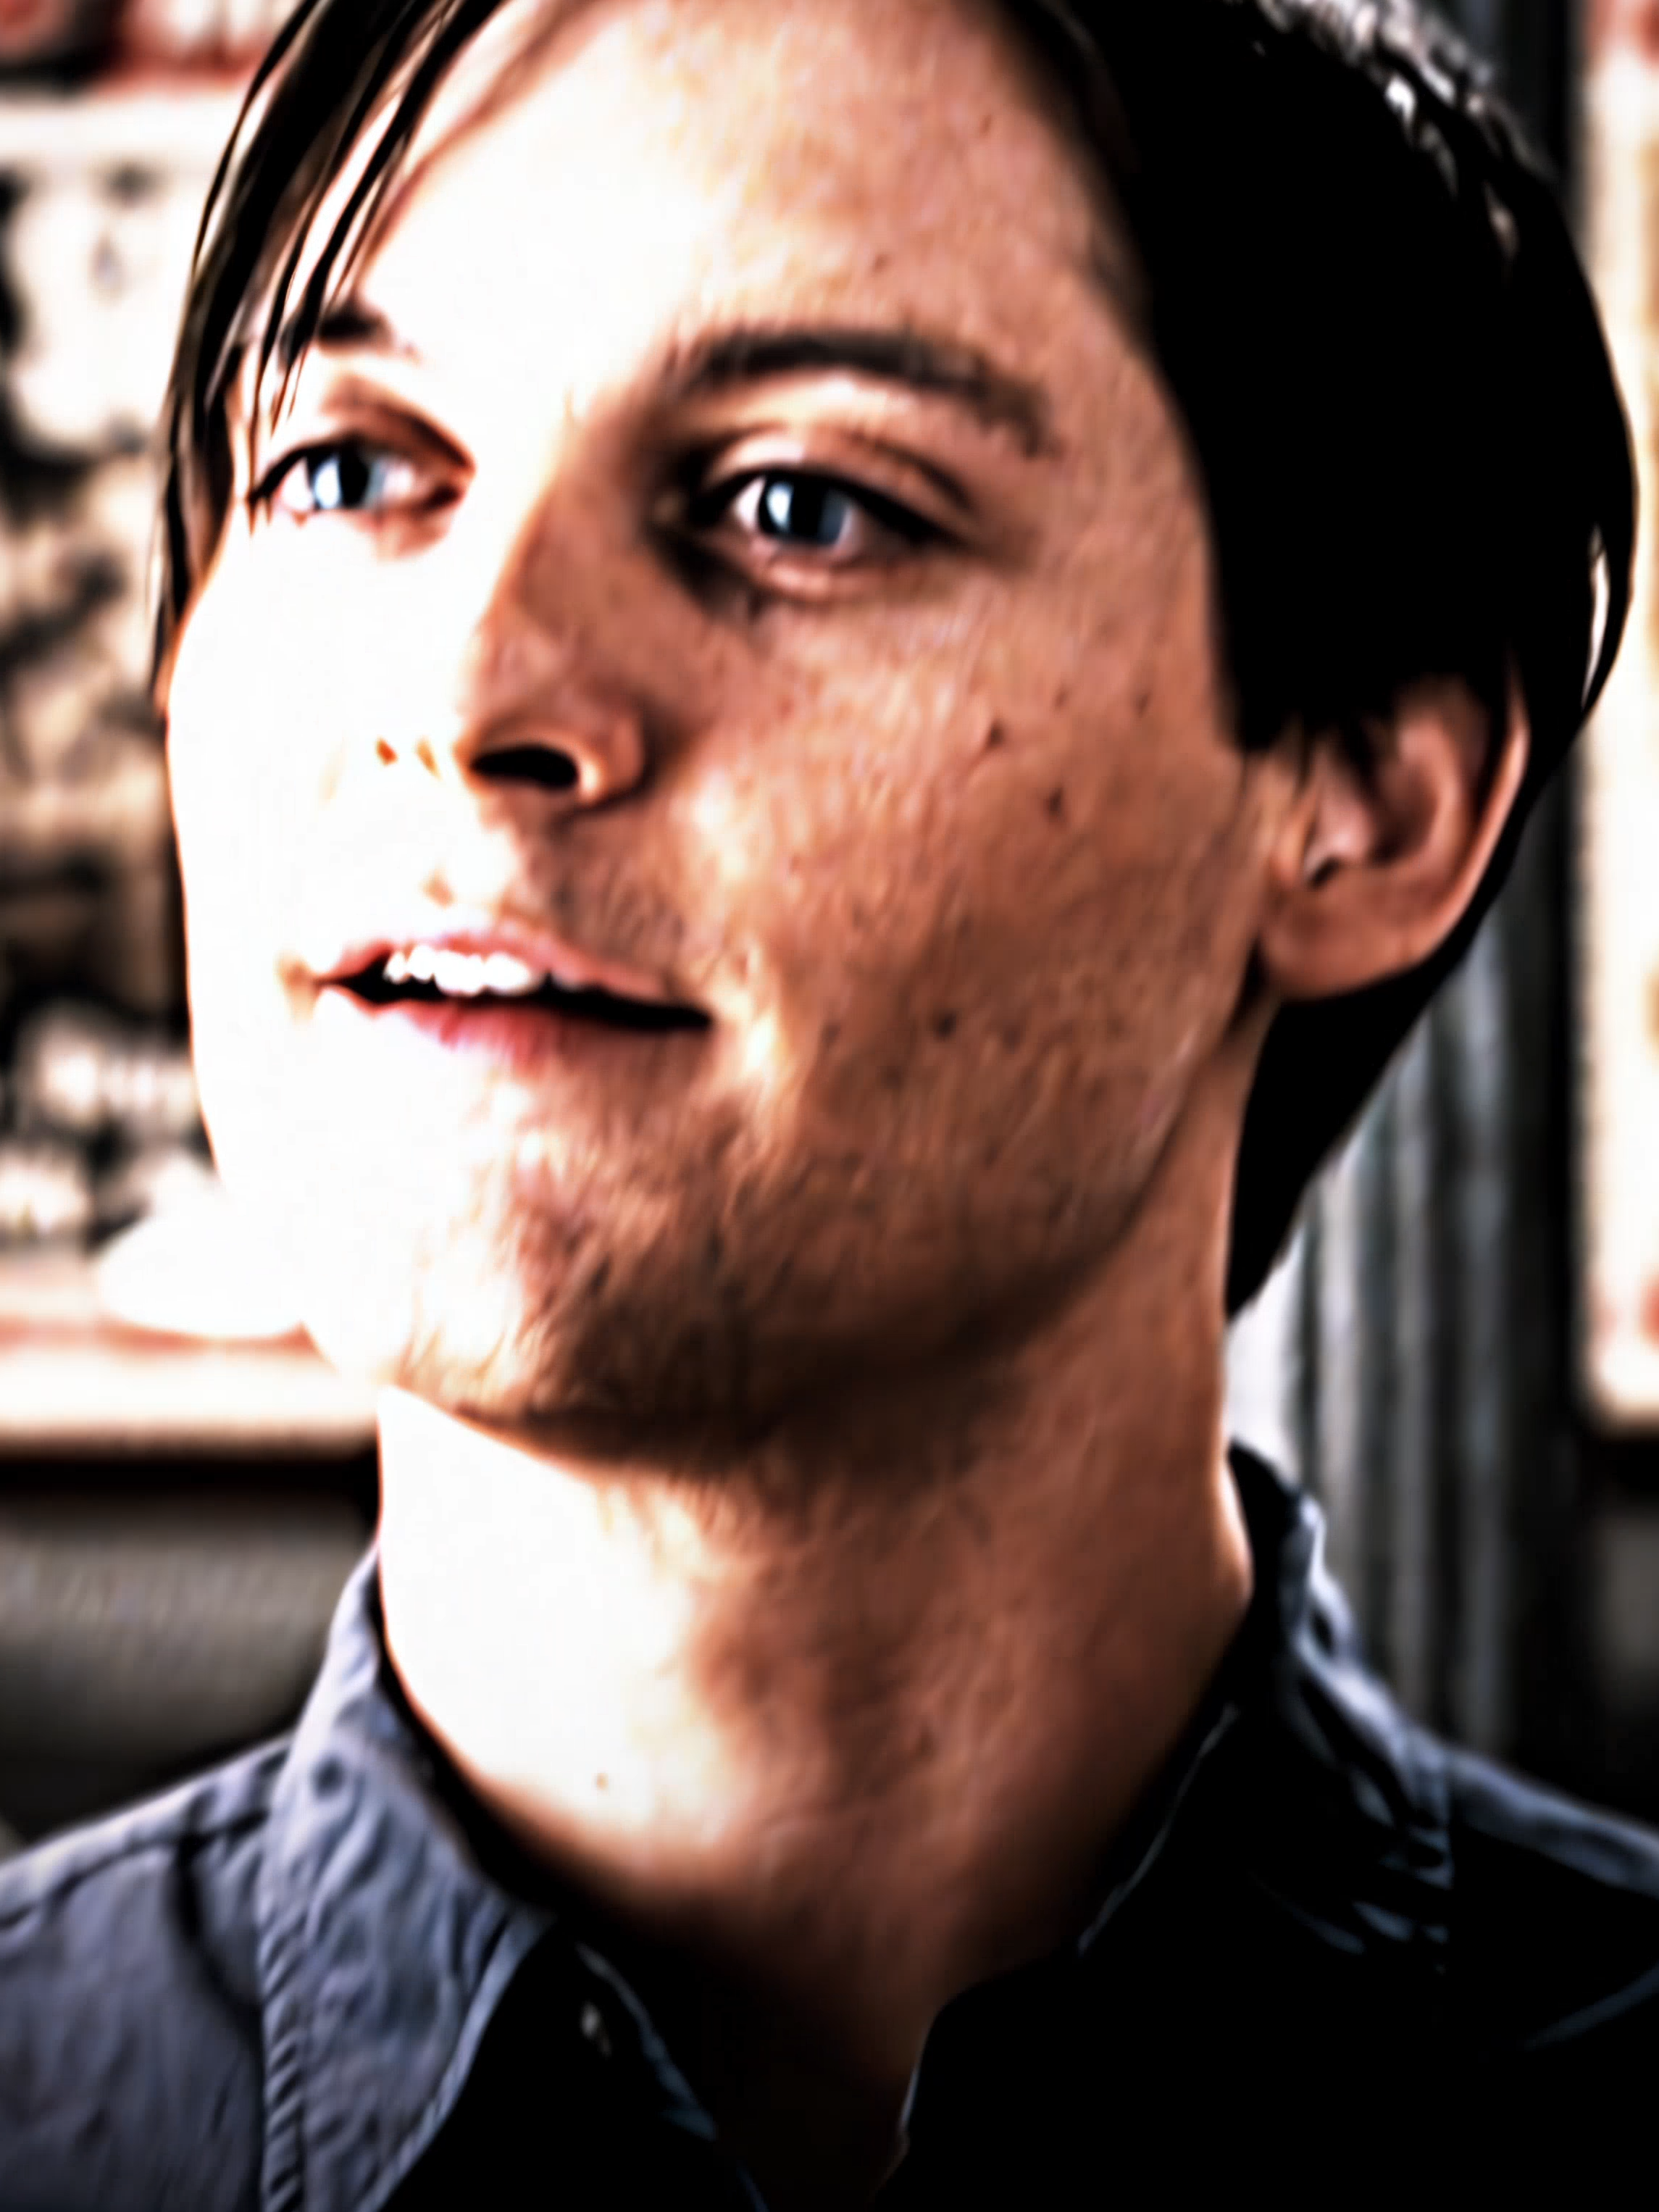 real #tobeymaguire #spiderman #marvel #viral #aftereffects